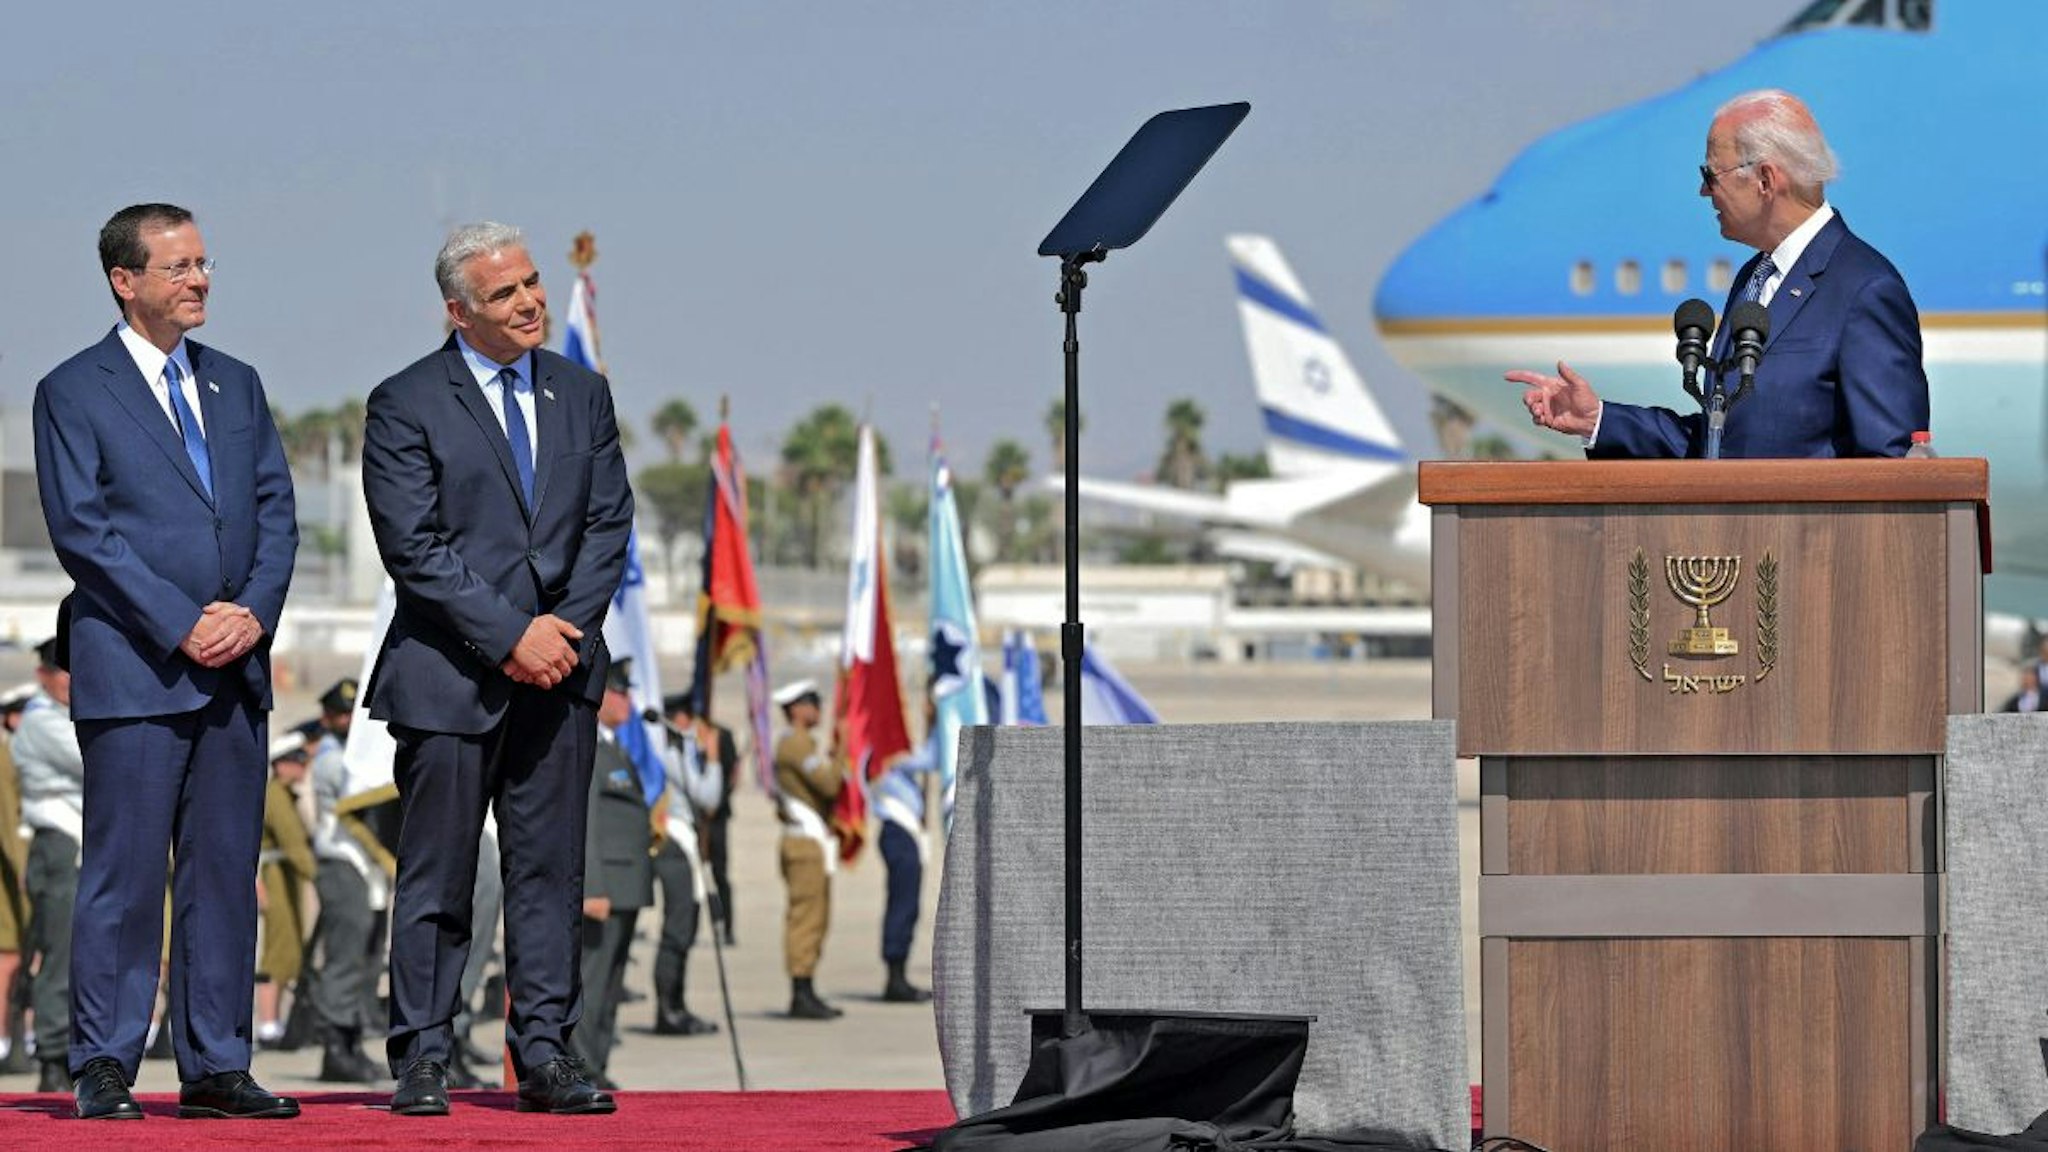 Israel's President Isaac Herzog (L) and caretaker Prime Minister Yair Lapid (C) listen to US President Joe Biden (R) as he addresses his hosts upon his arrival at Ben Gurion Airport in Lod near Tel Aviv, on July 13, 2022.